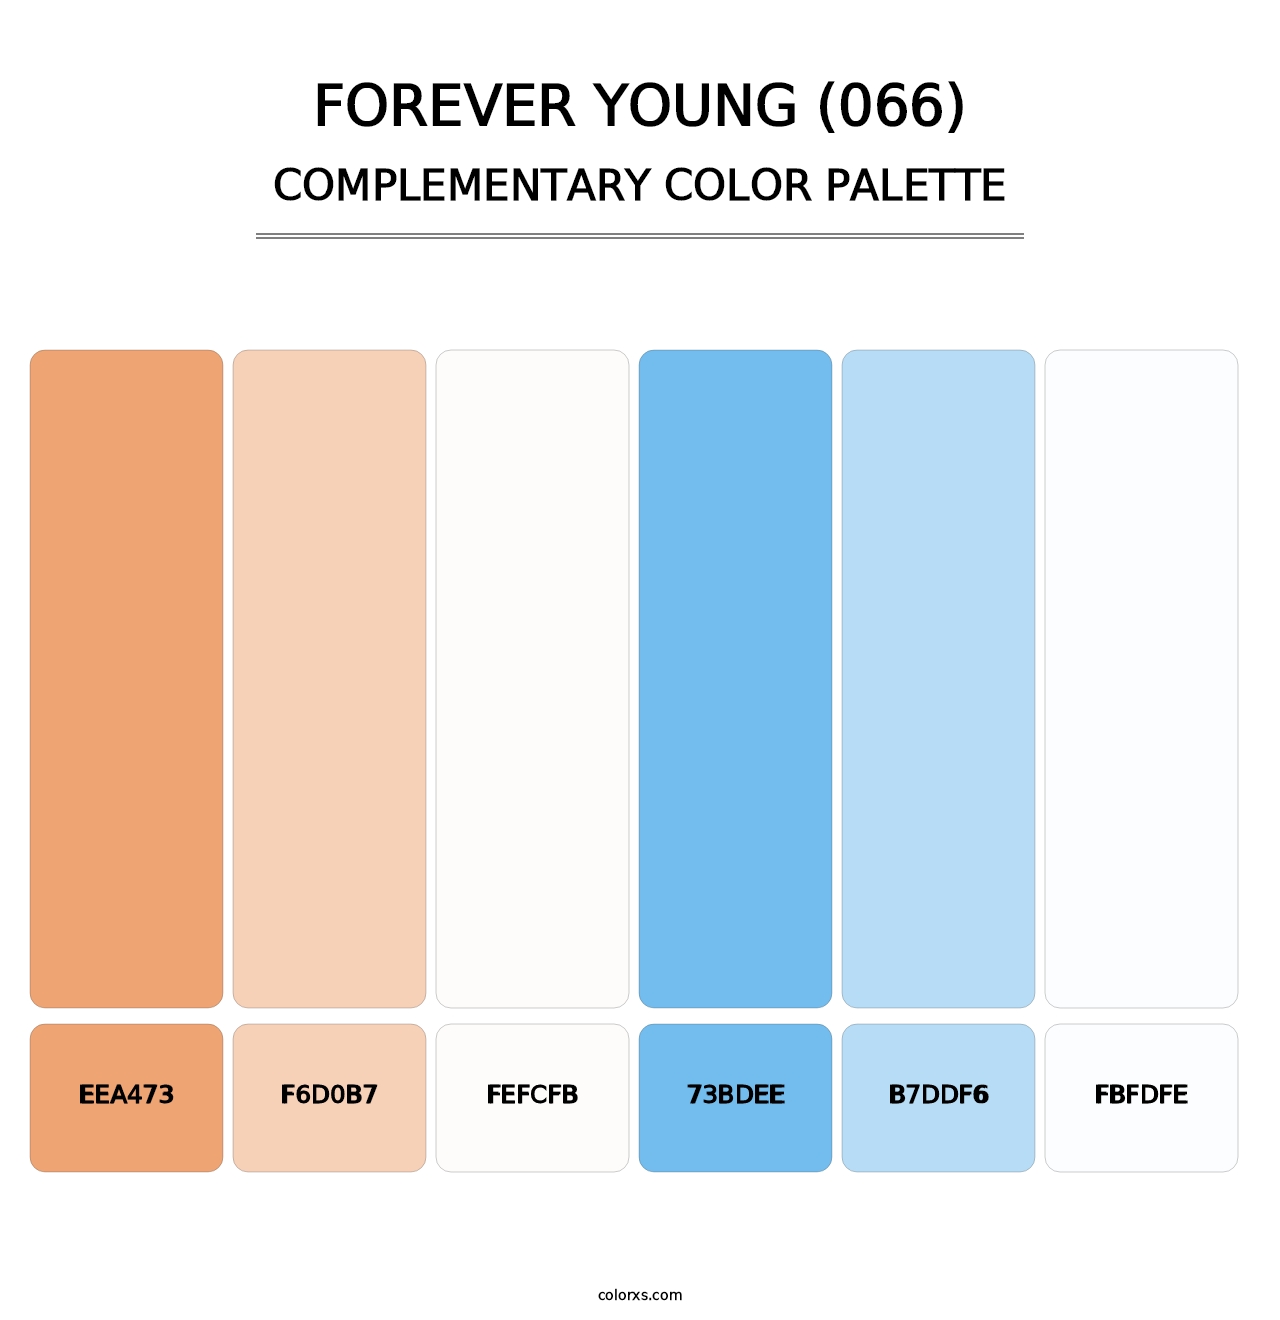 Forever Young (066) - Complementary Color Palette